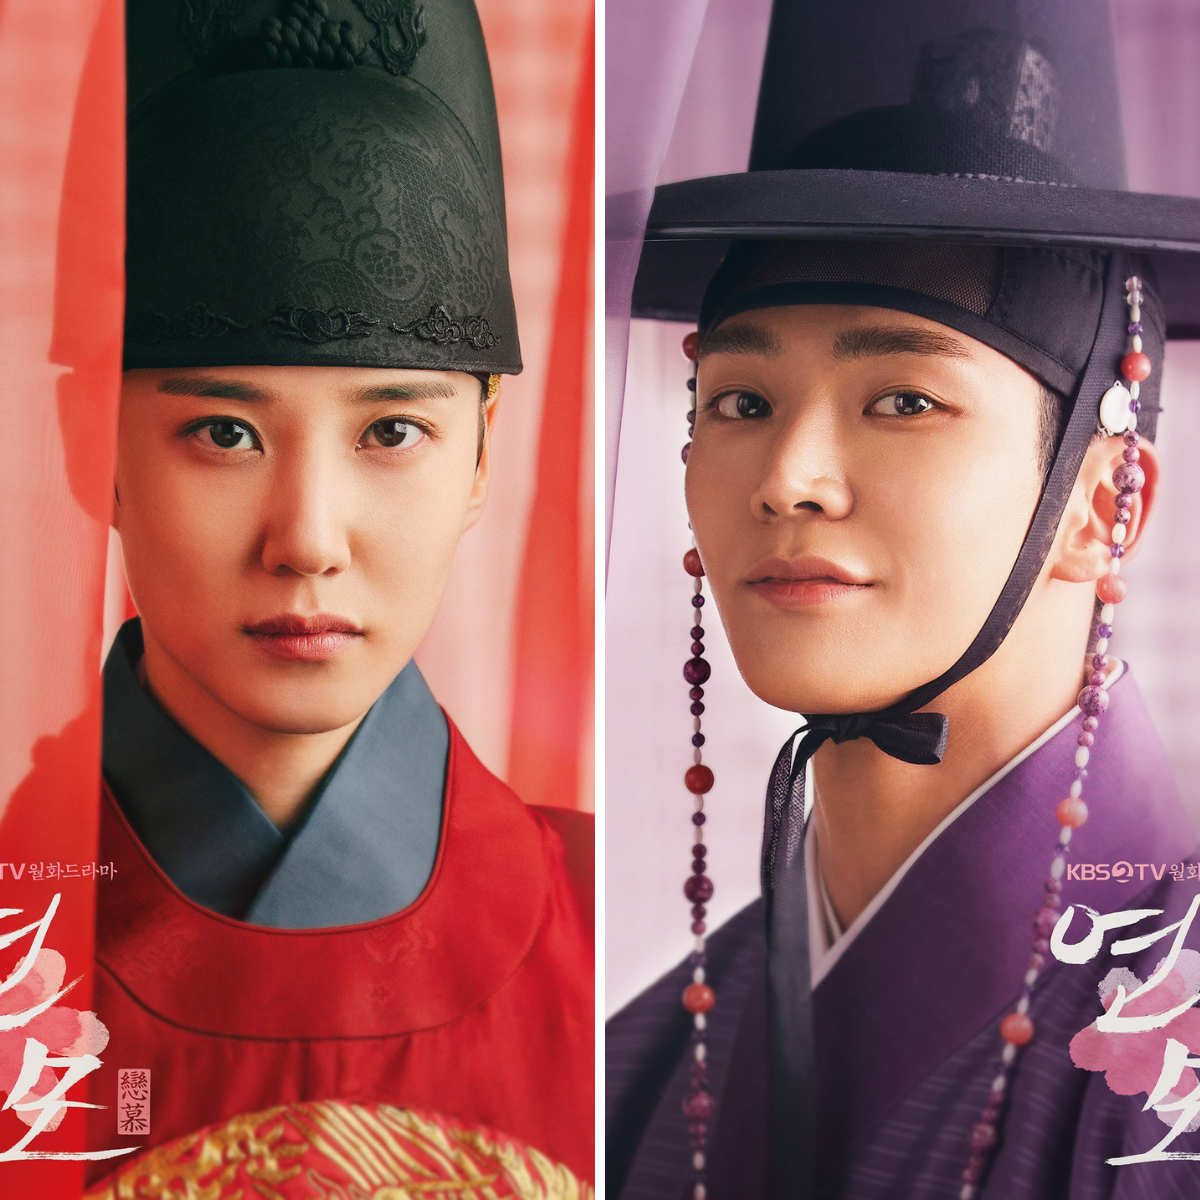 The King’s Affection Ep 19 & 20: 6 defining moments that sum up the tumultuous concluding episodes